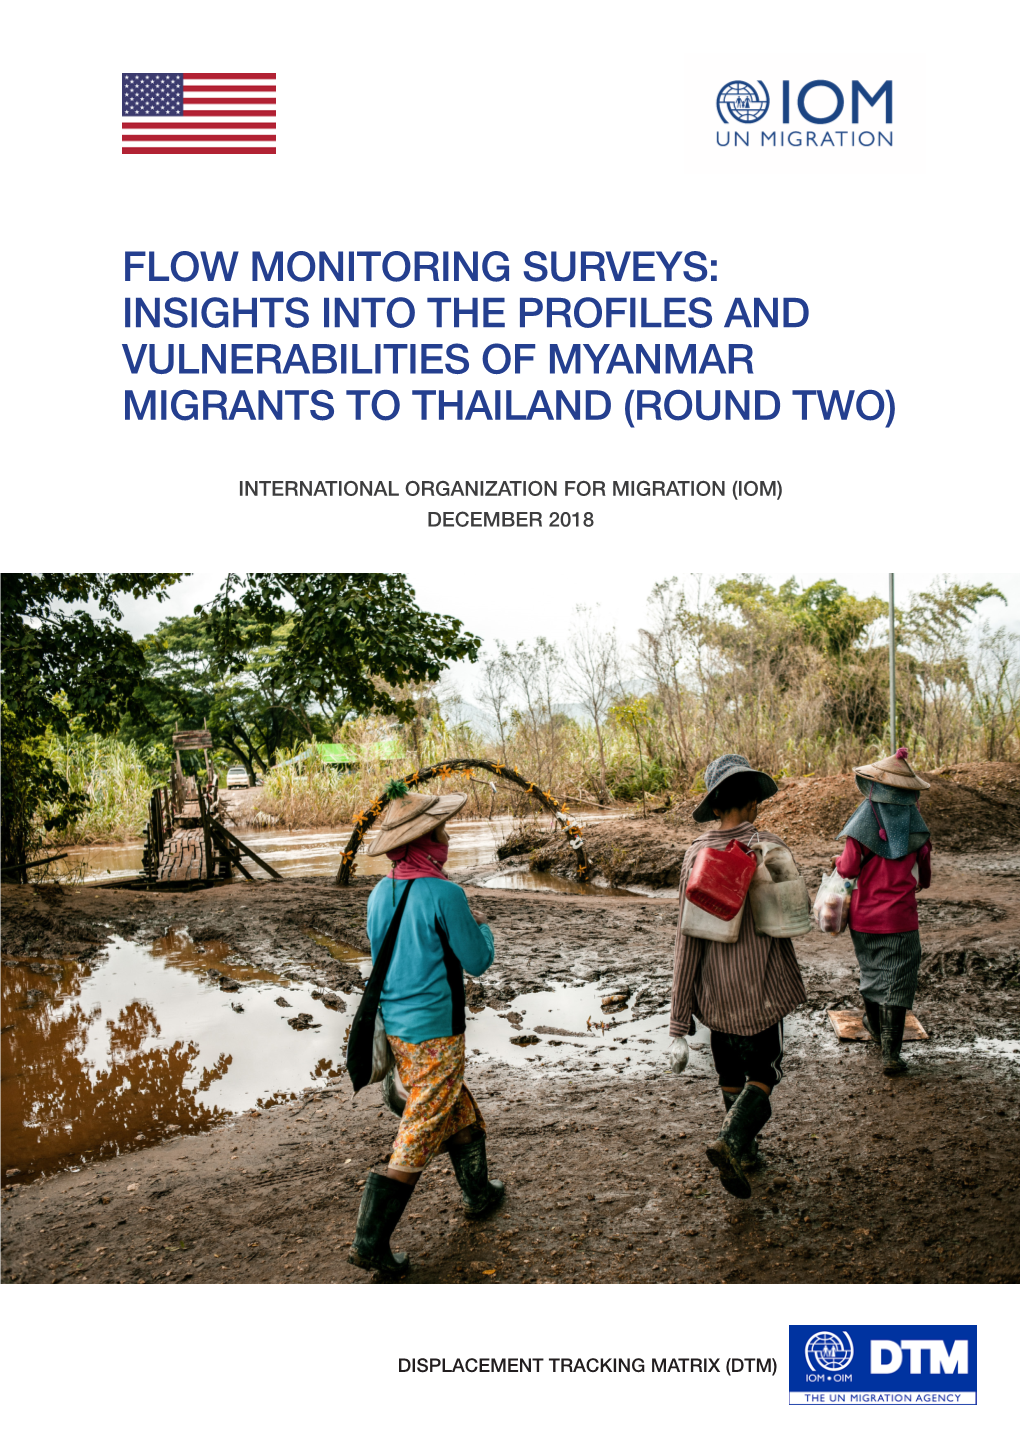 Insights Into the Profiles and Vulnerabilities of Myanmar Migrants to Thailand (Round Two)